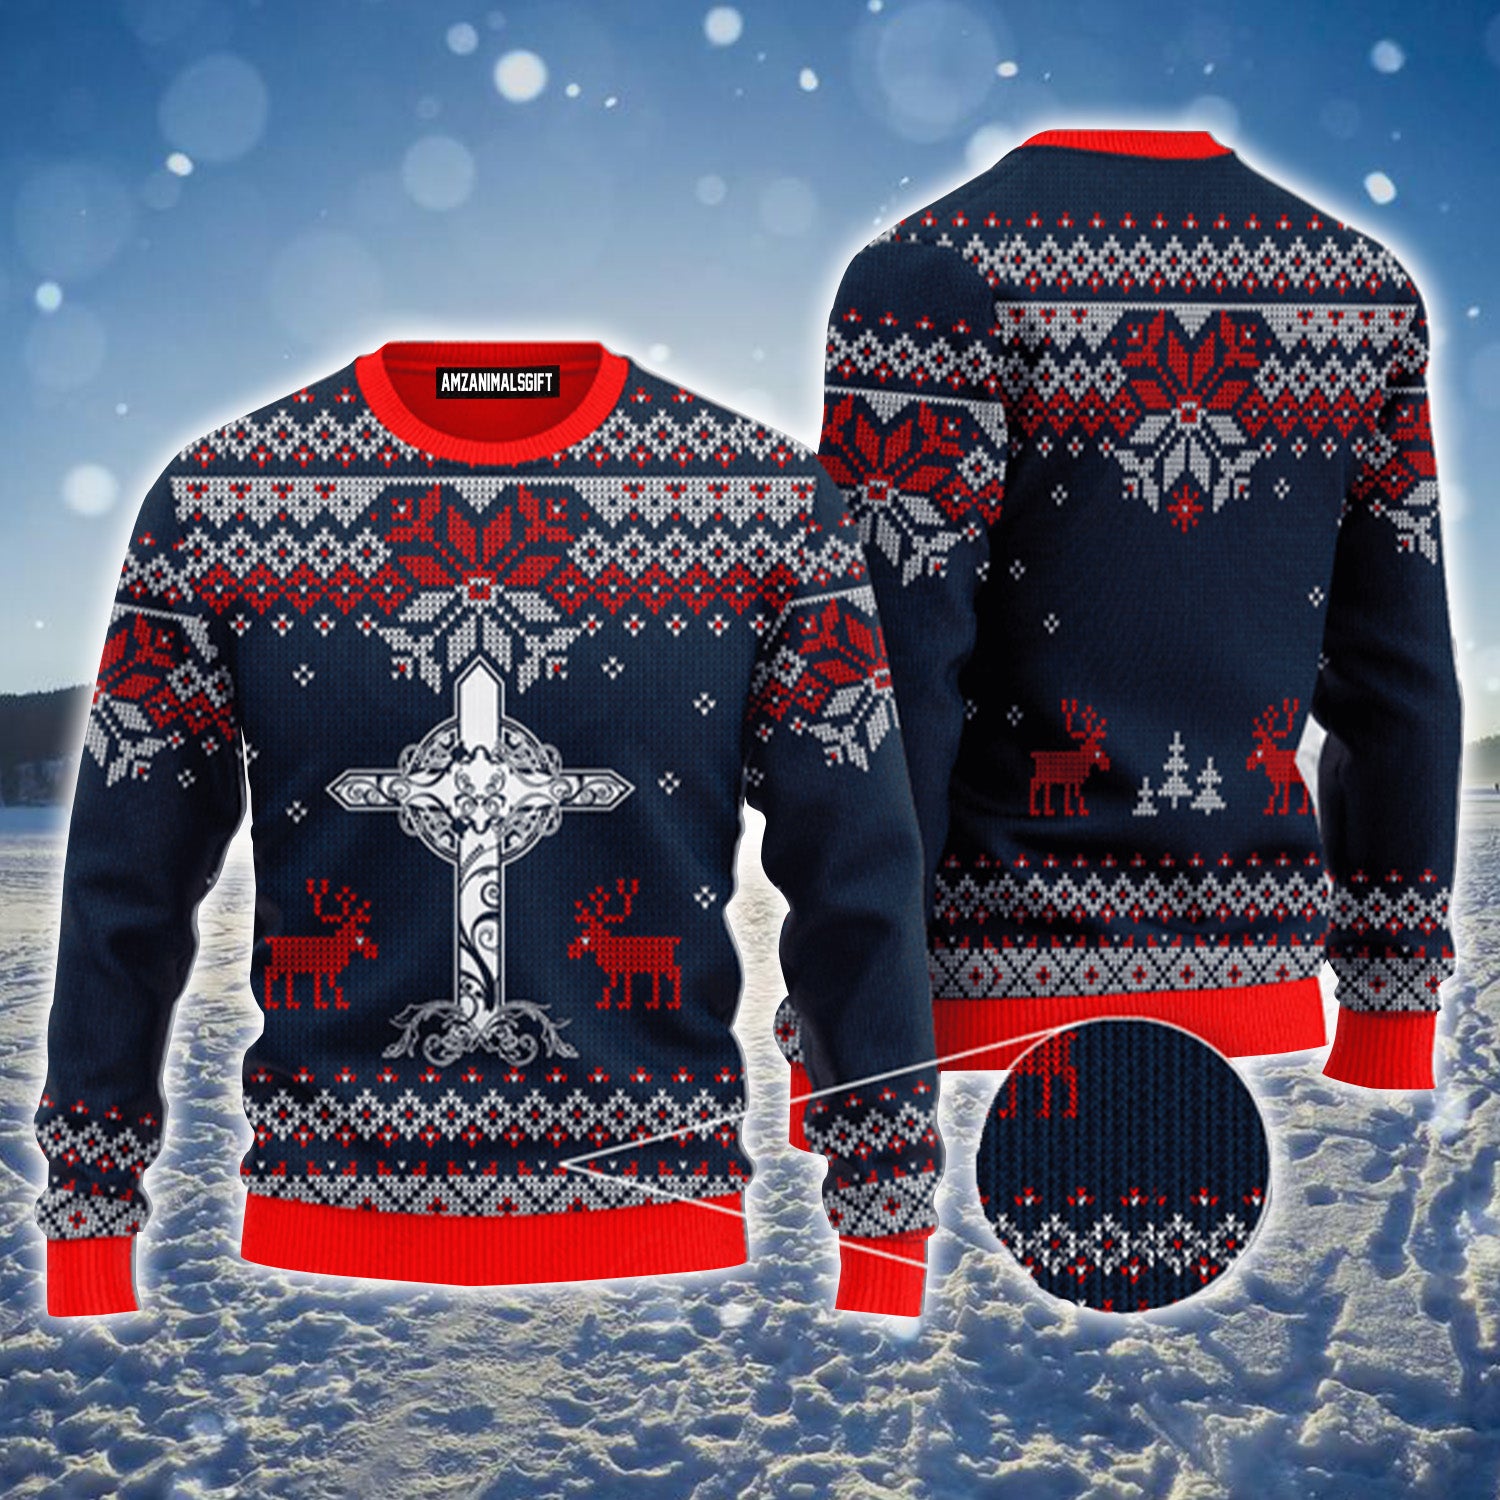 Dark Blue Christian Cross Reindeer Snow Pattern Urly Sweater, Christmas Sweater For Men & Women - Perfect Gift For New Year, Winter, Christmas